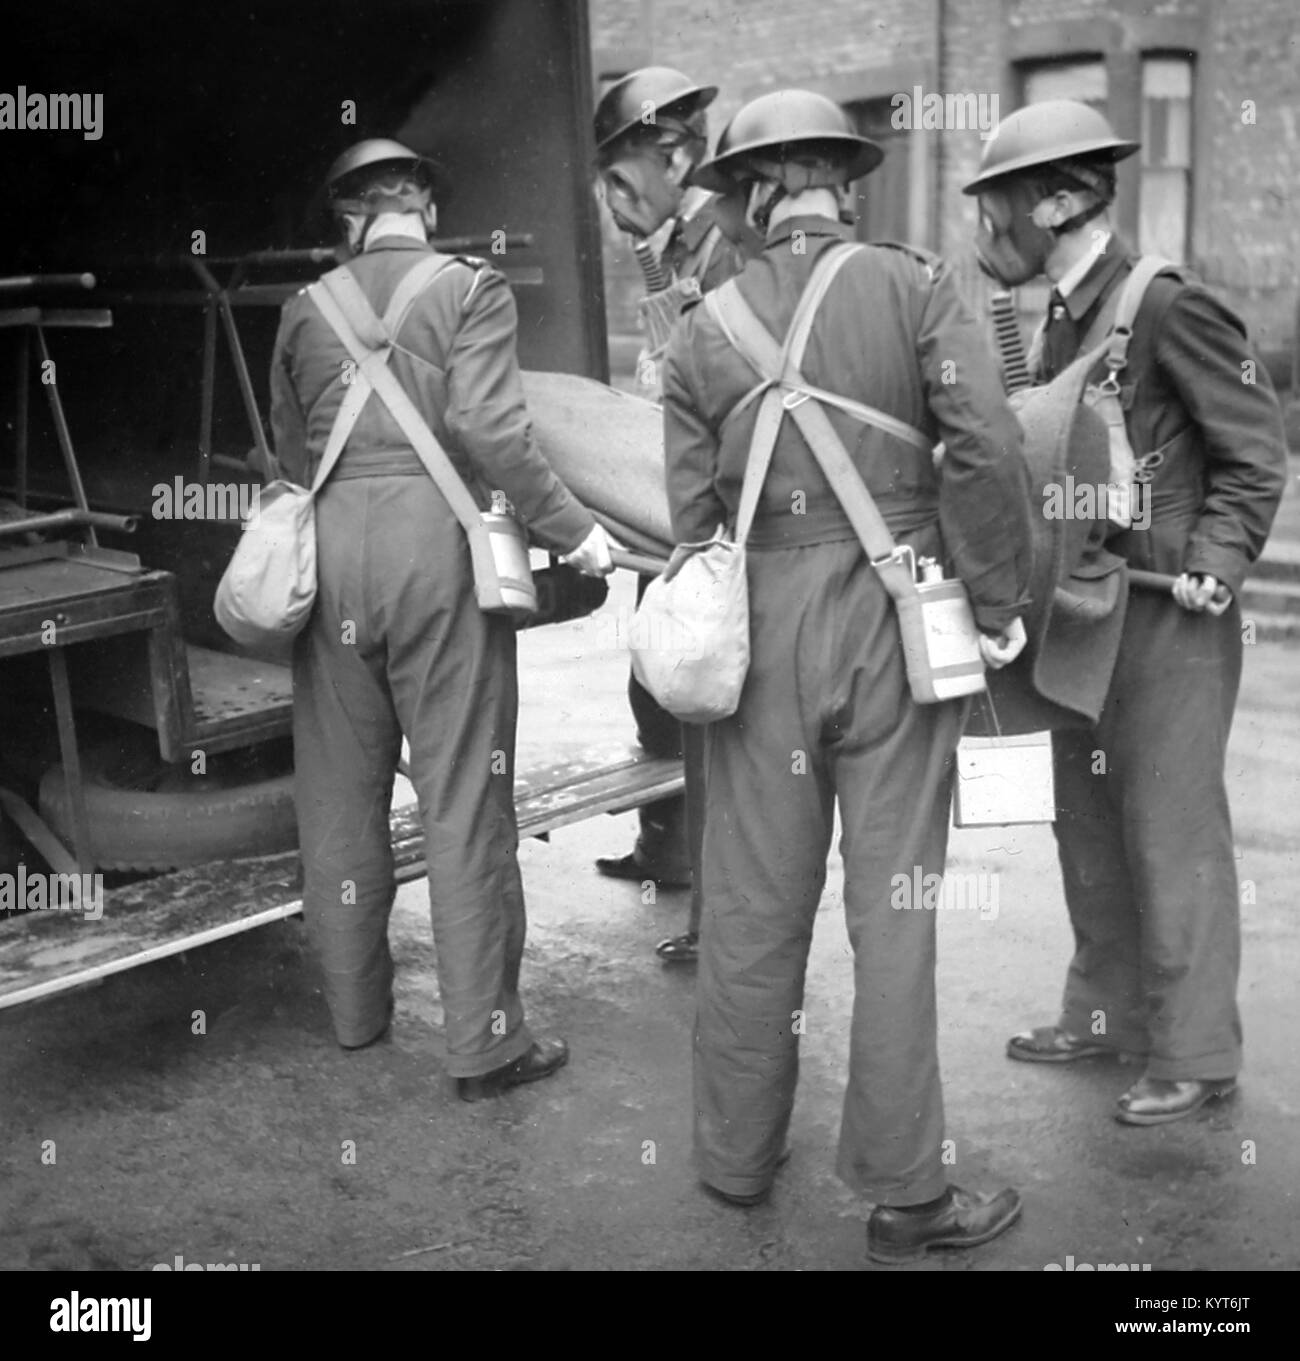 Loading an injured person into an ambulance, ARP training exercise during WW2 Stock Photo